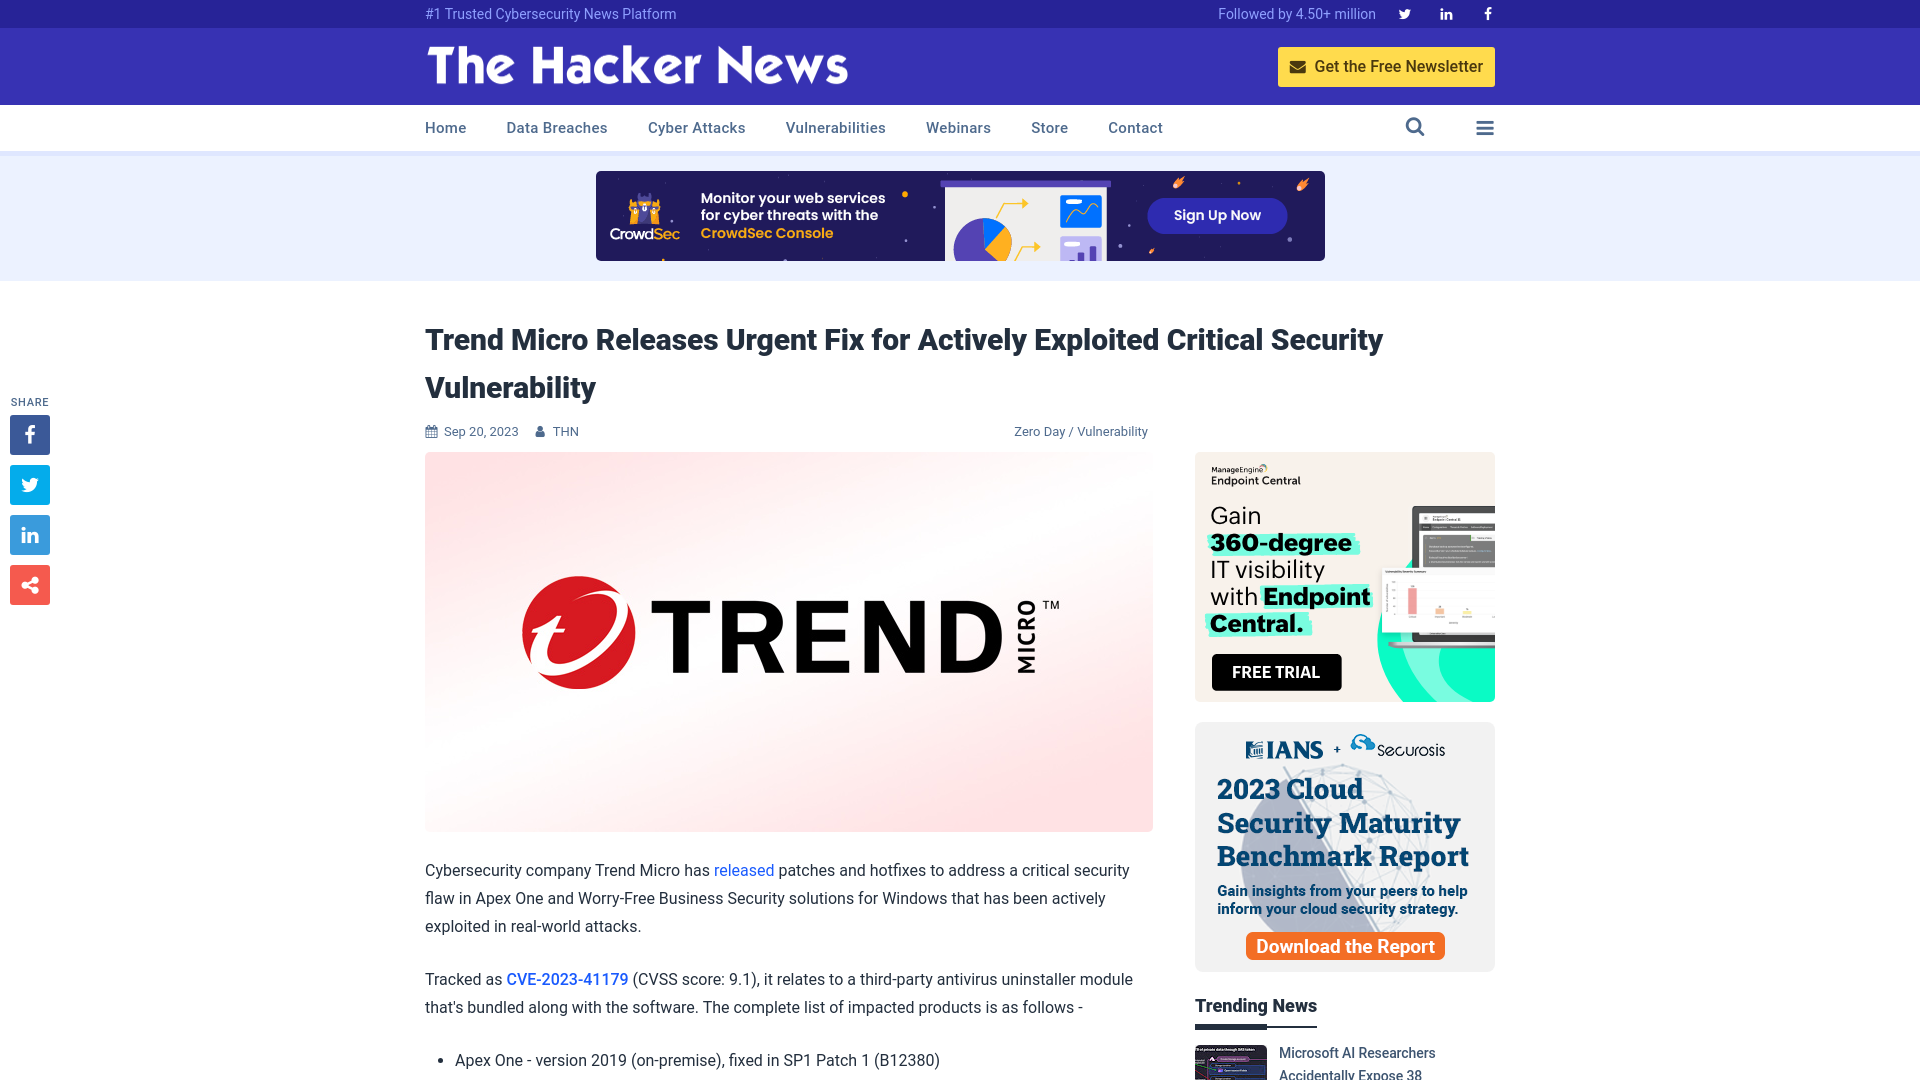 Trend Micro Releases Urgent Fix for Actively Exploited Critical Security Vulnerability